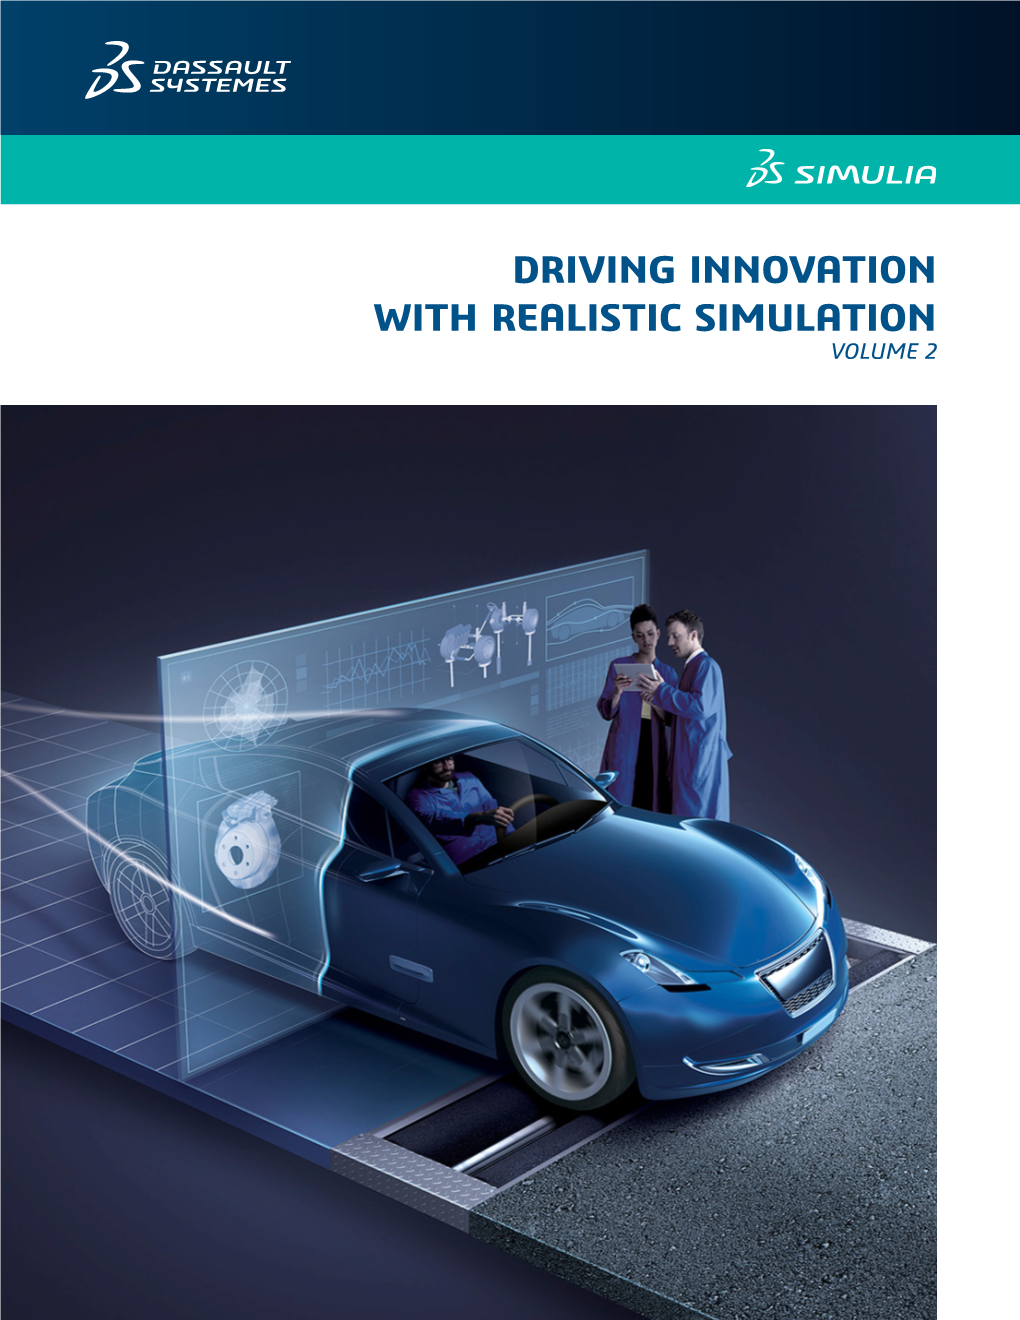 Driving Innovation with Realistic Simulation Volume 2